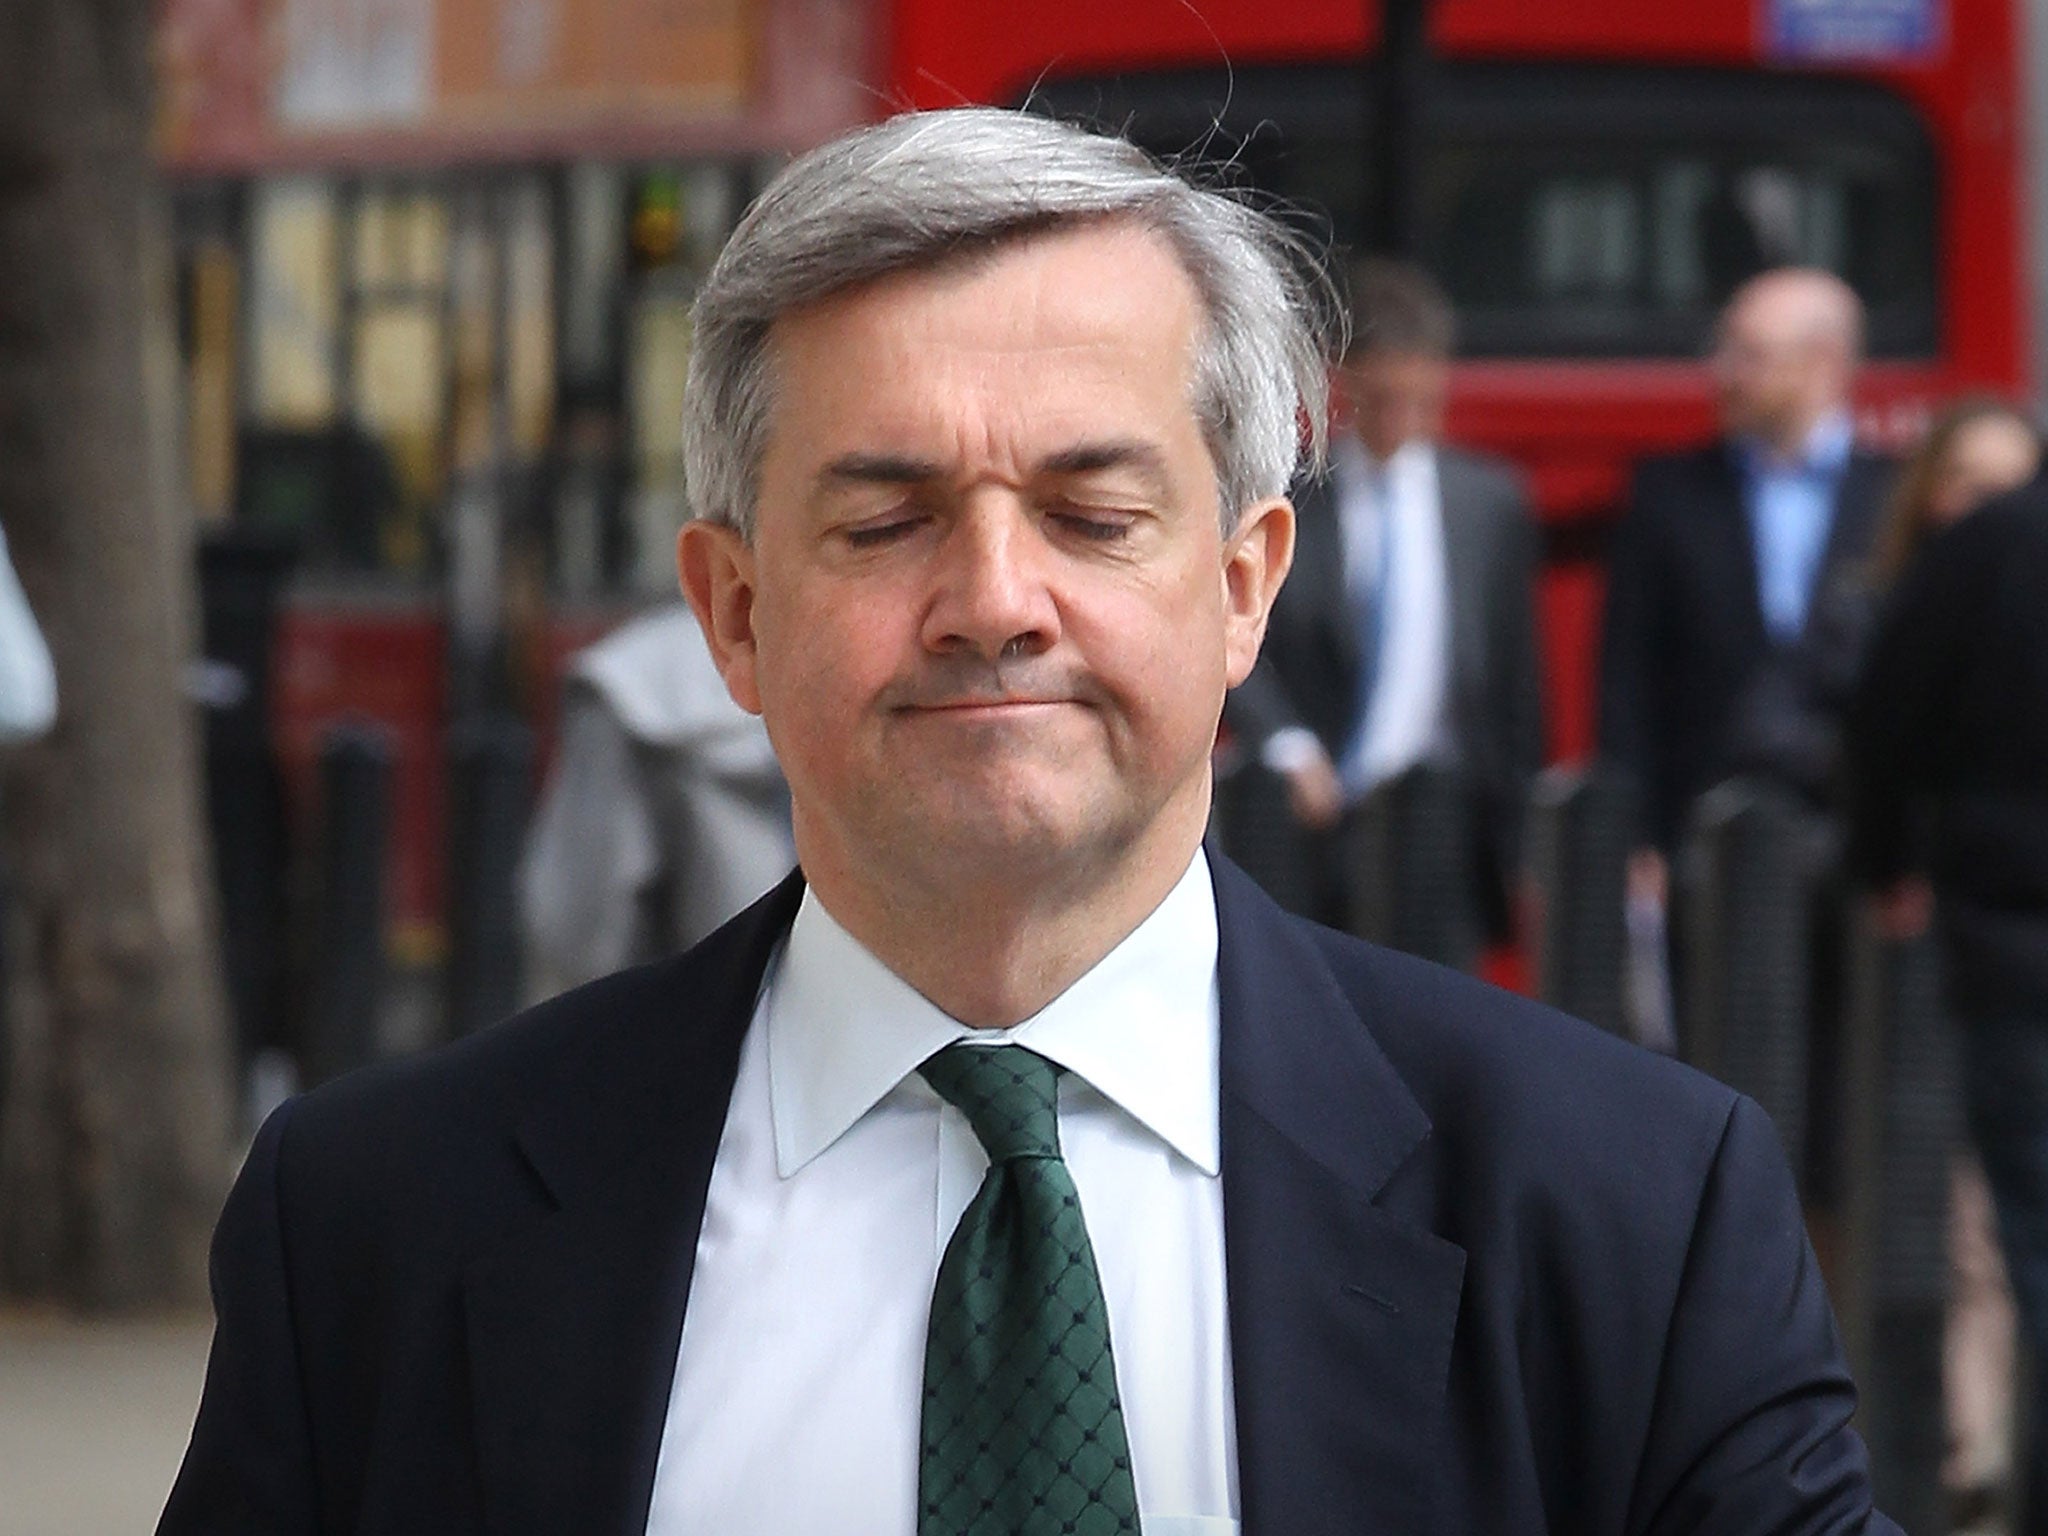 Energy Secretary Chris Huhne arrives at The Cabinet Office entrance for a Cabinet meeting on May 17, 2011 in London, England.